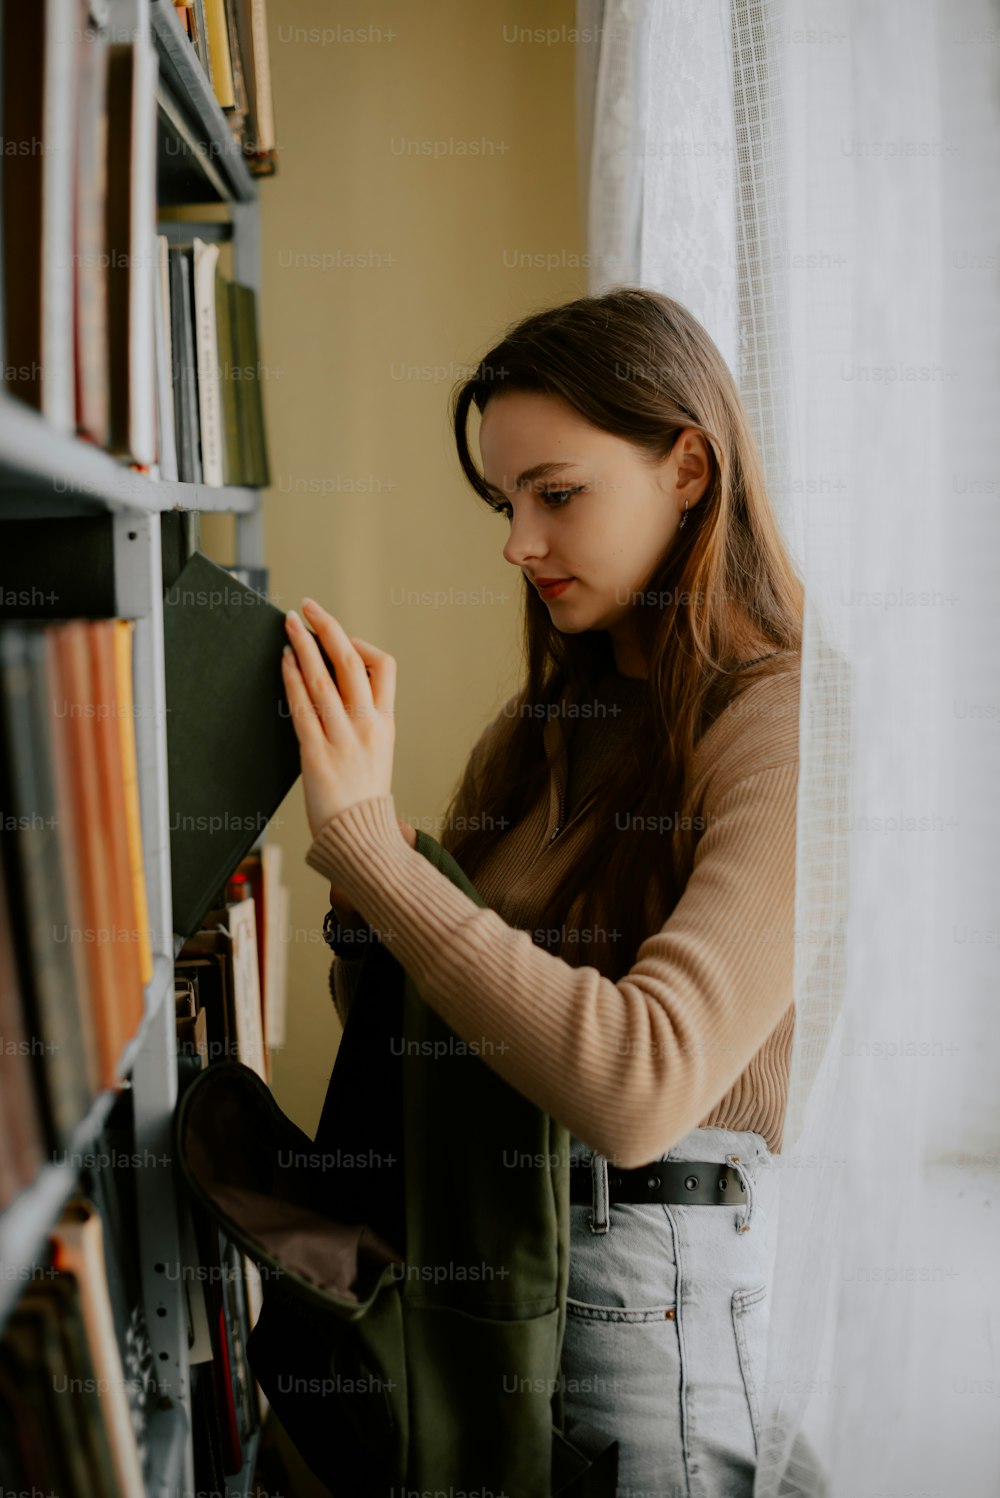 a woman standing in front of a book shelf